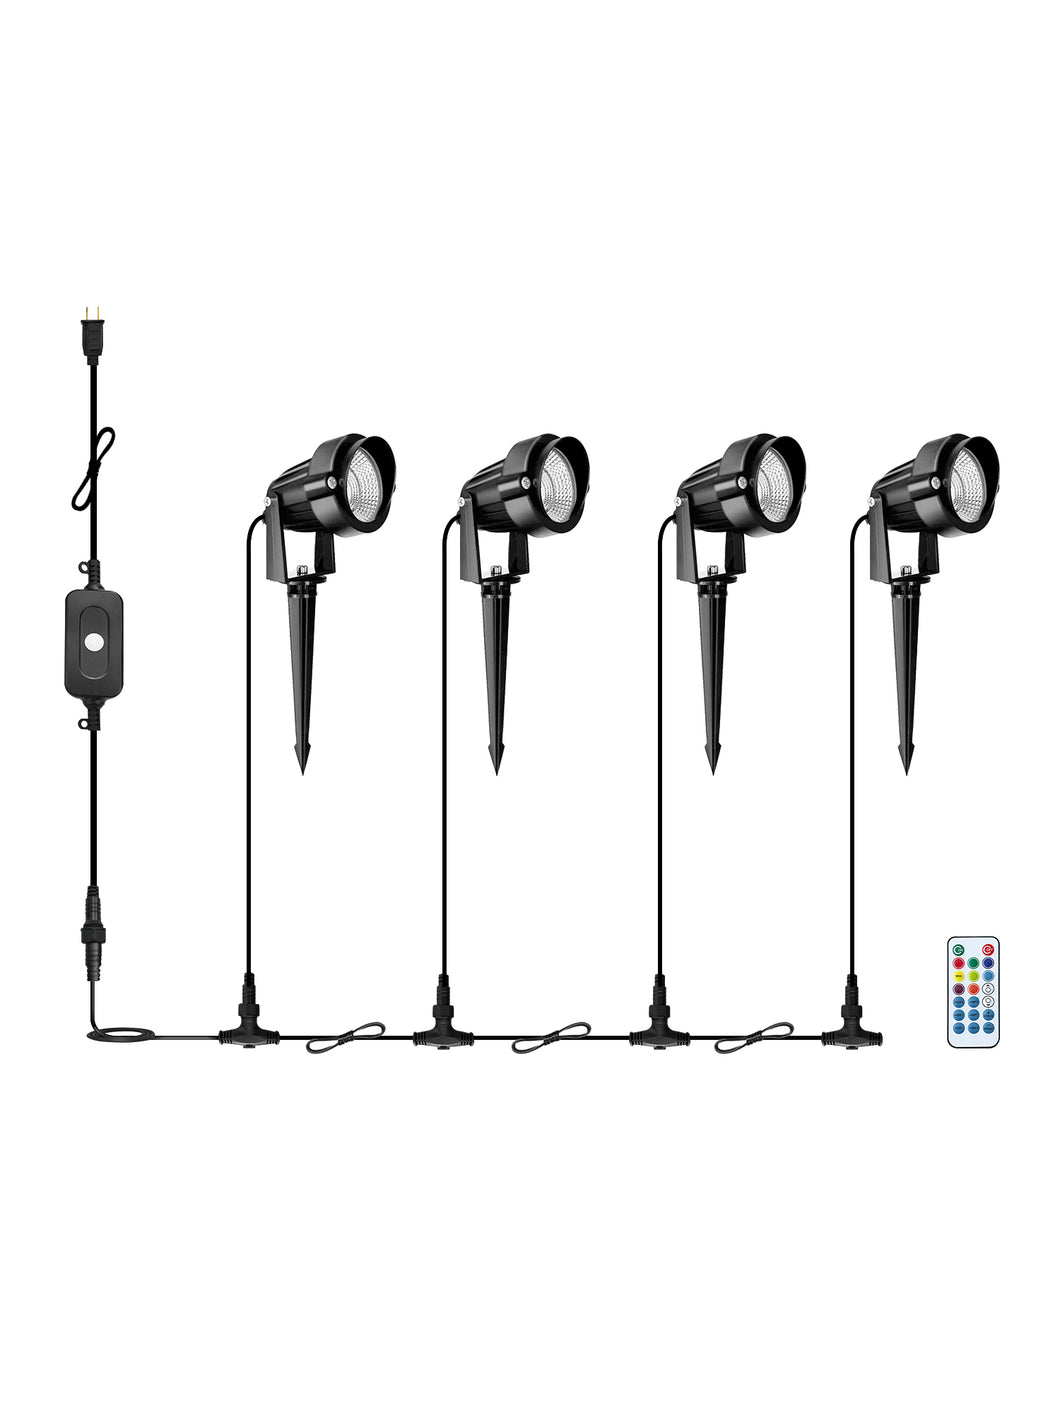 15FT 4-In-1 RGB LED Landscape Spotlights With Remote